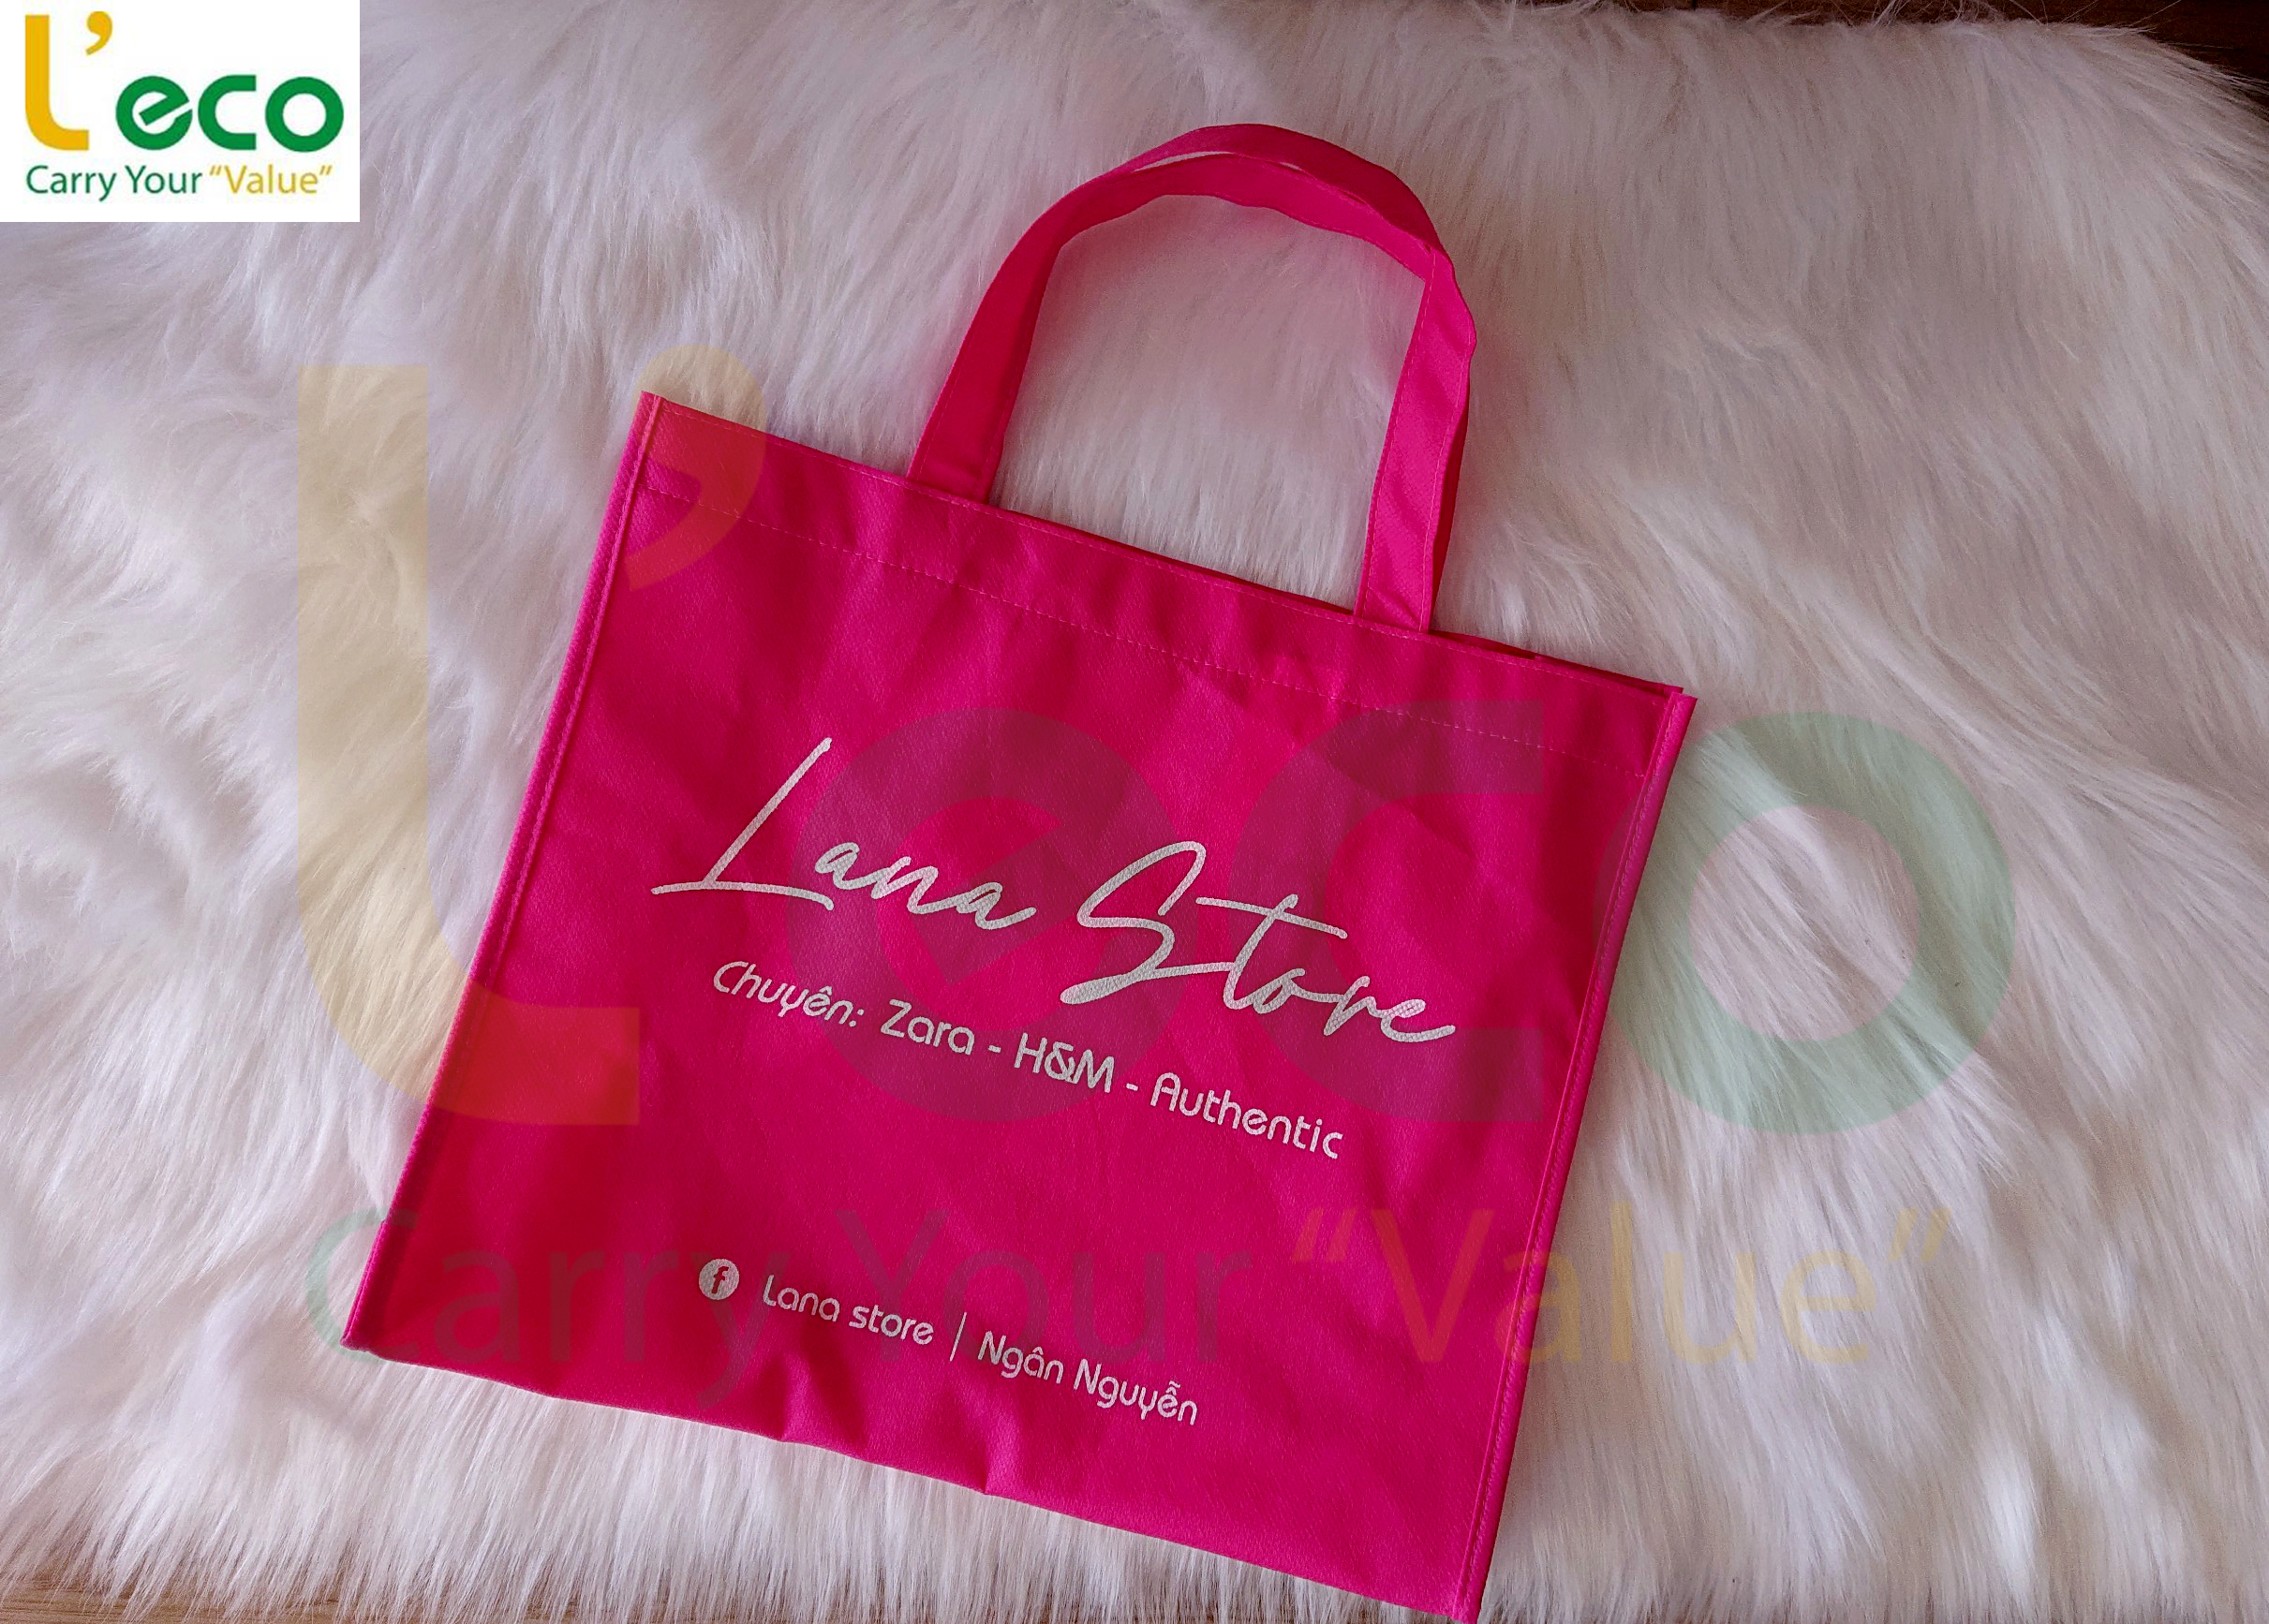 Non-woven bags bring benefits to businesses